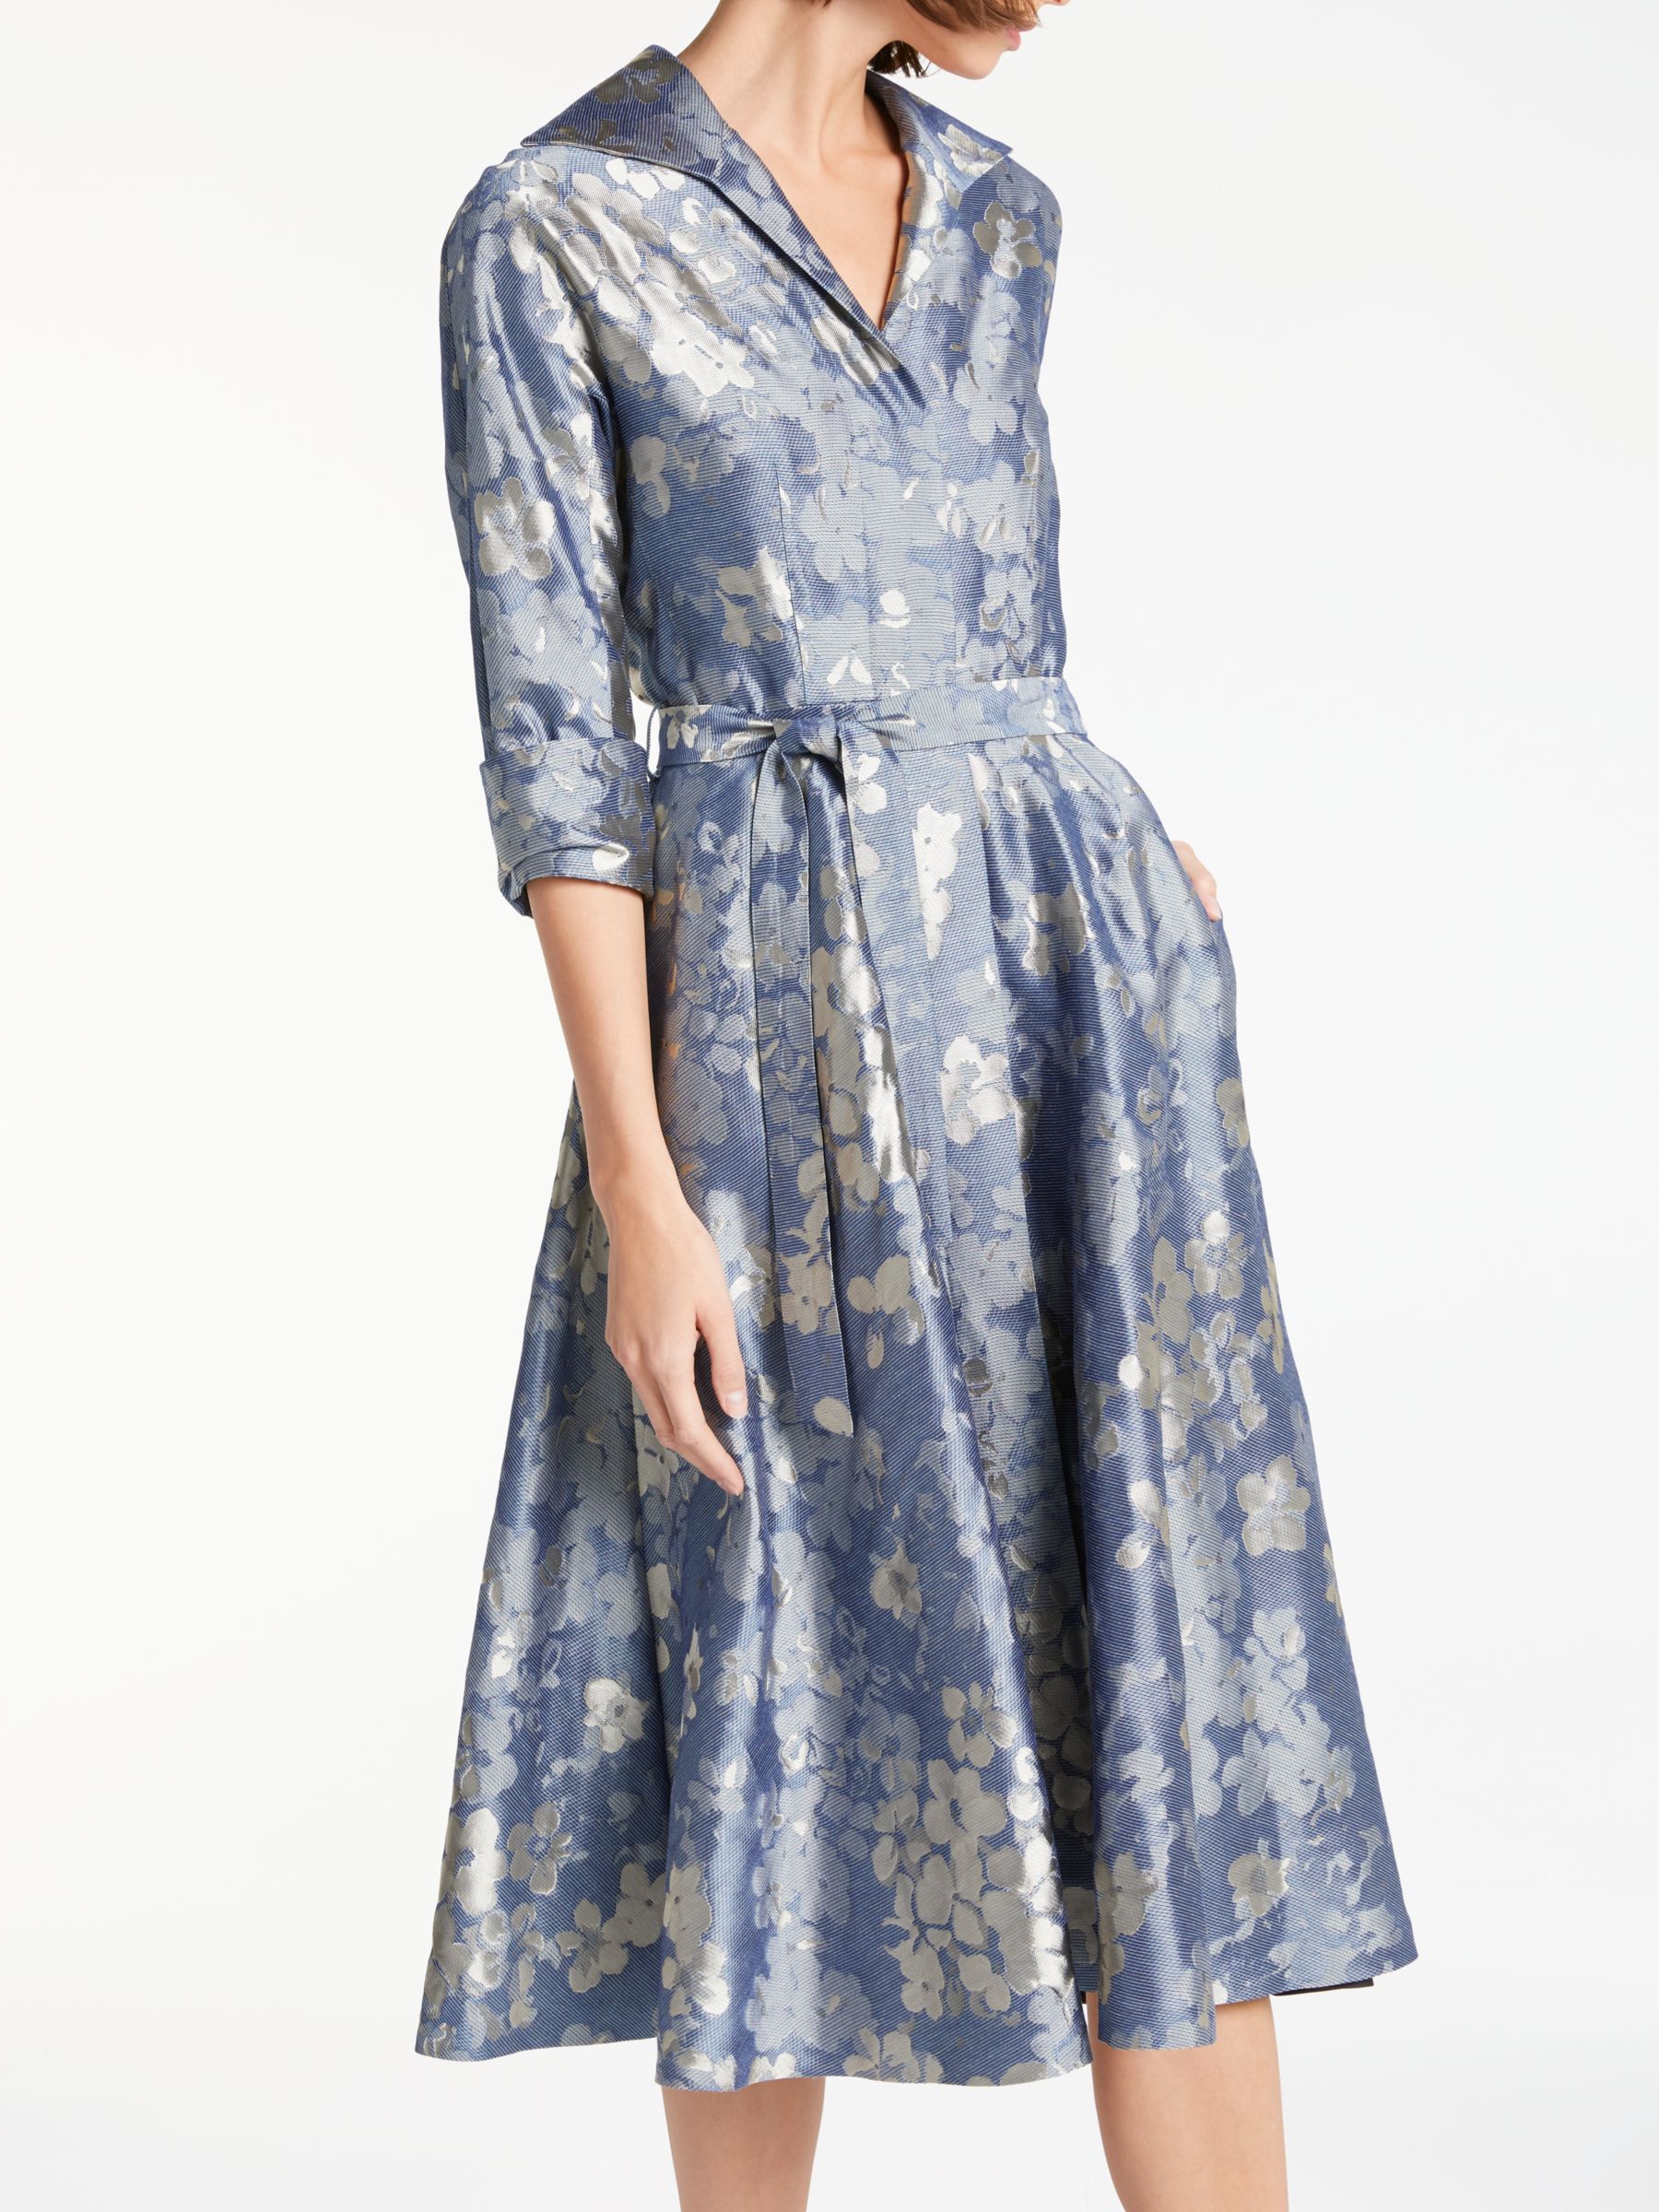 Bruce by Bruce Oldfield Floral Jacquard Dress, Blue